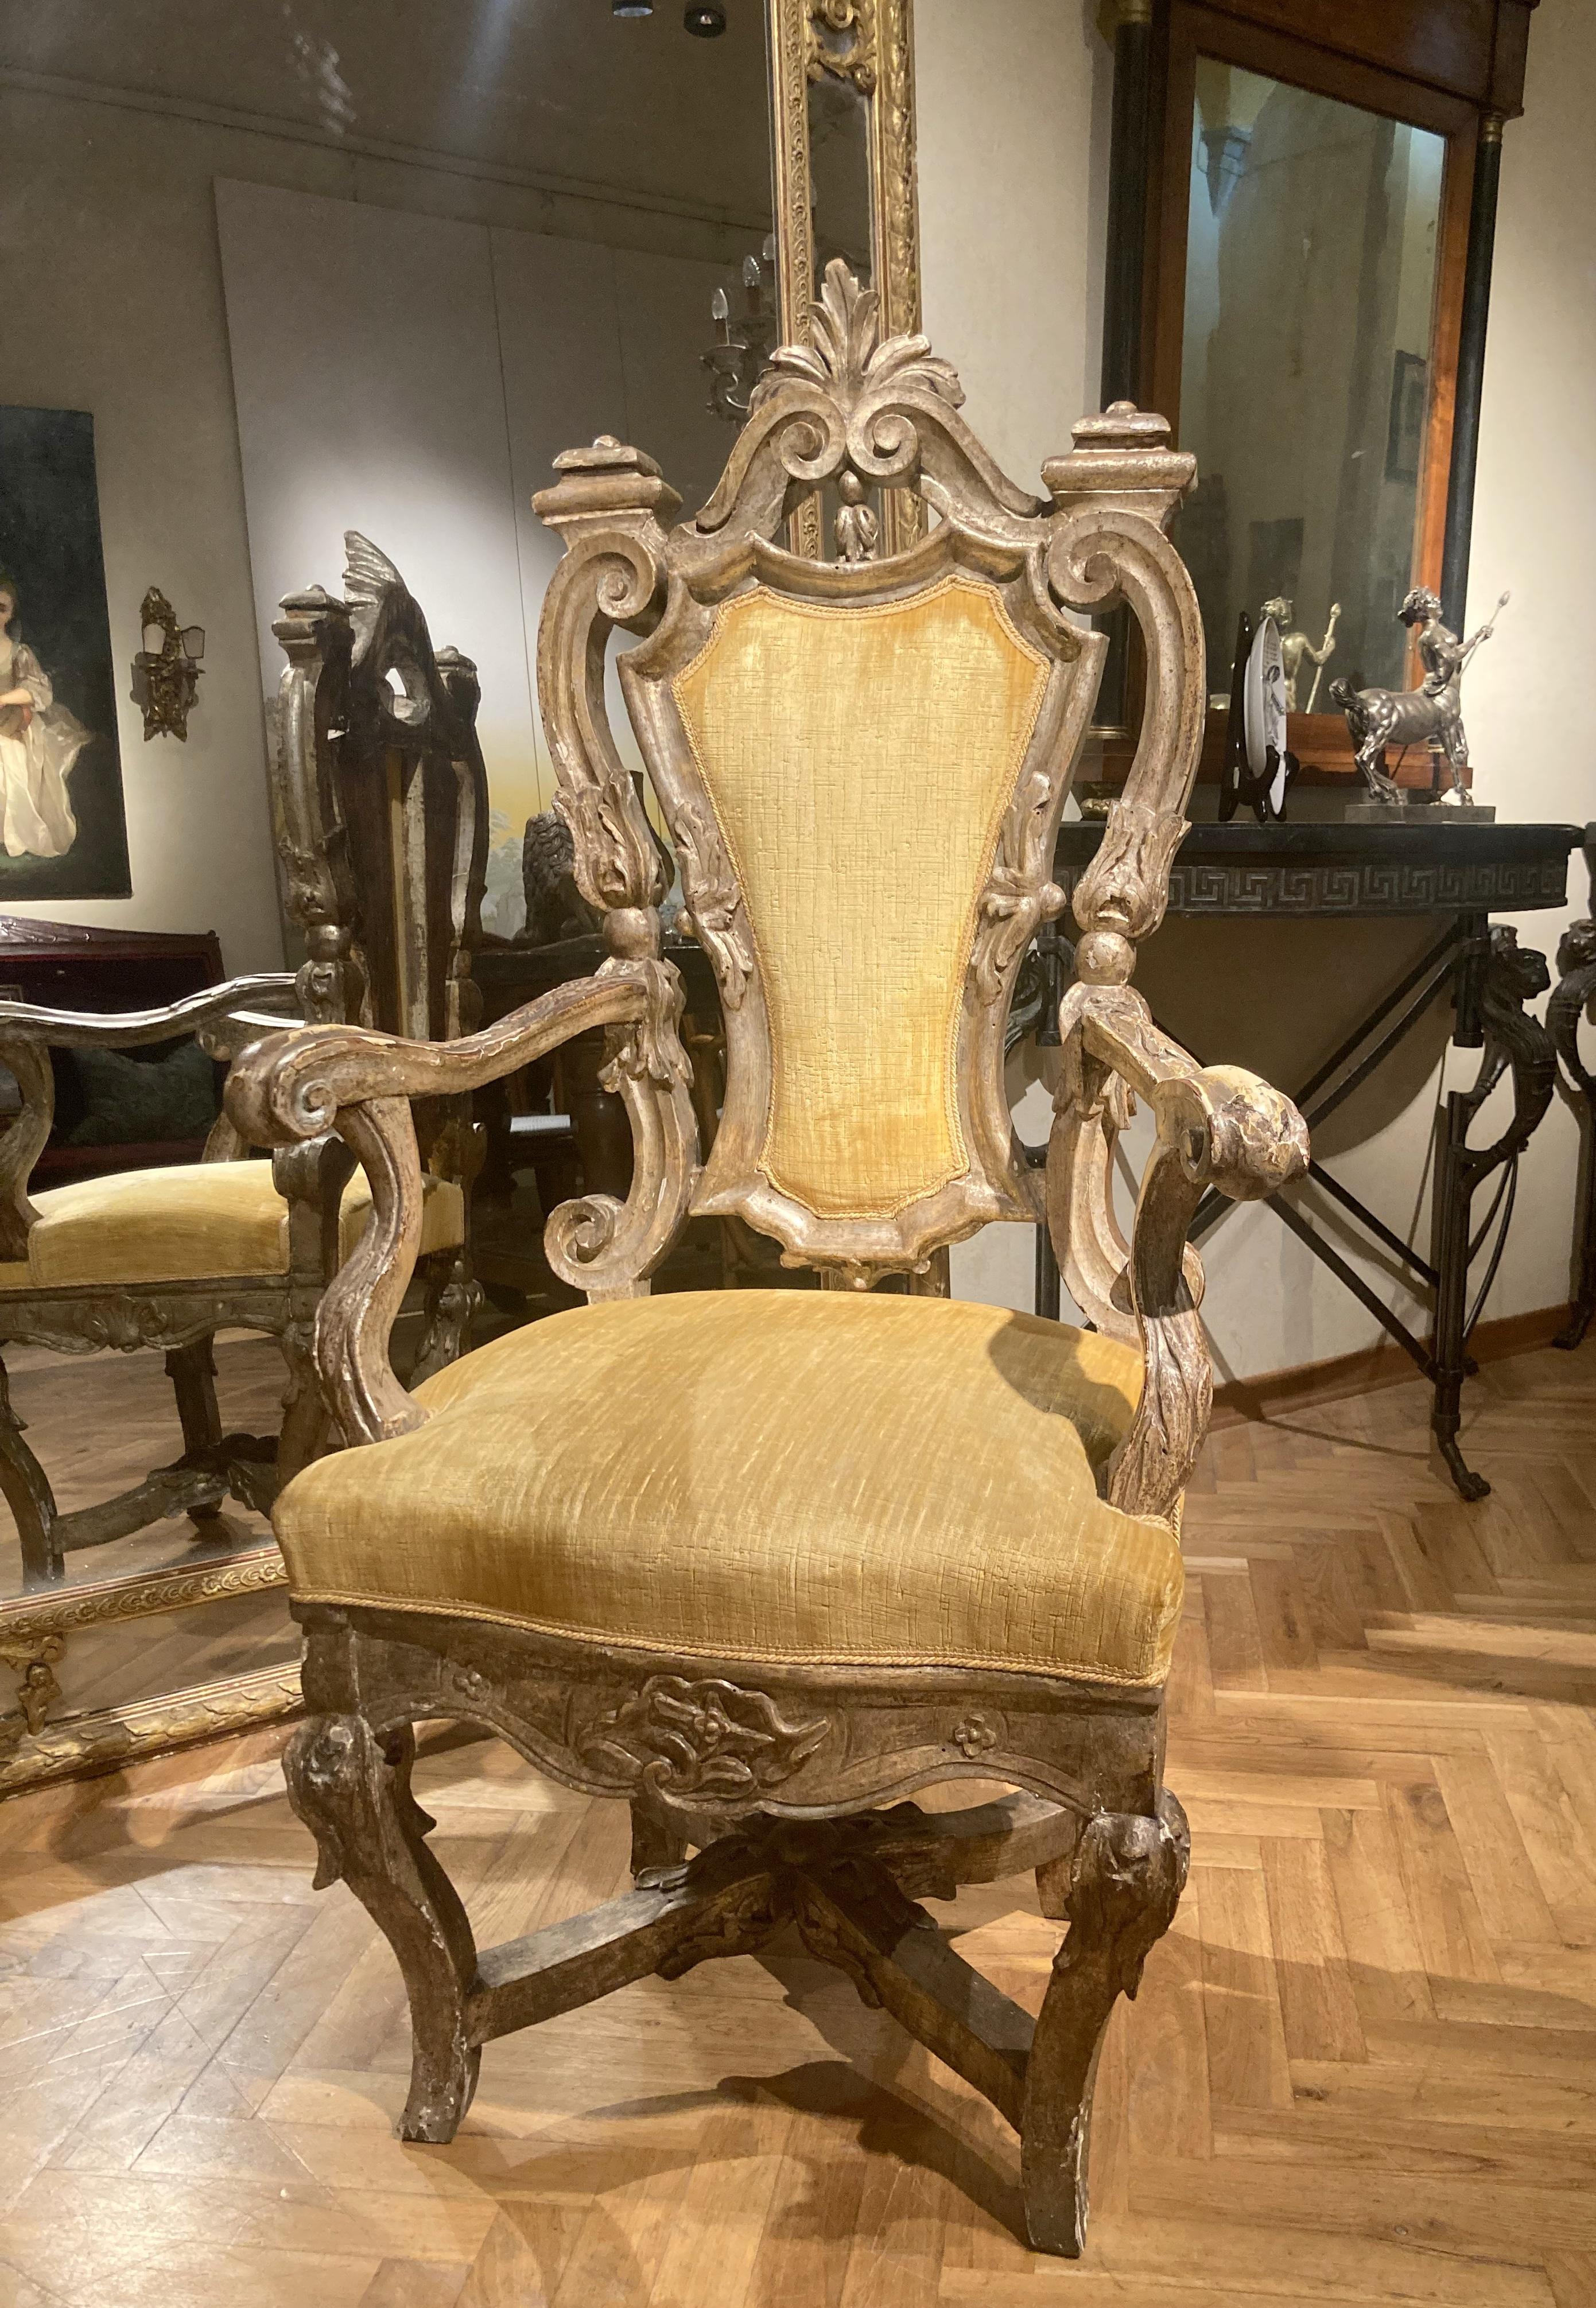 This antique Italian Rococo 17th century throne armchair sourced in a palazzo in Rome, features swirls, curls and foliate motif richly hand carved throughout, the solid wood deeply carved and pierced boasts a super chic mecca gilding with silver